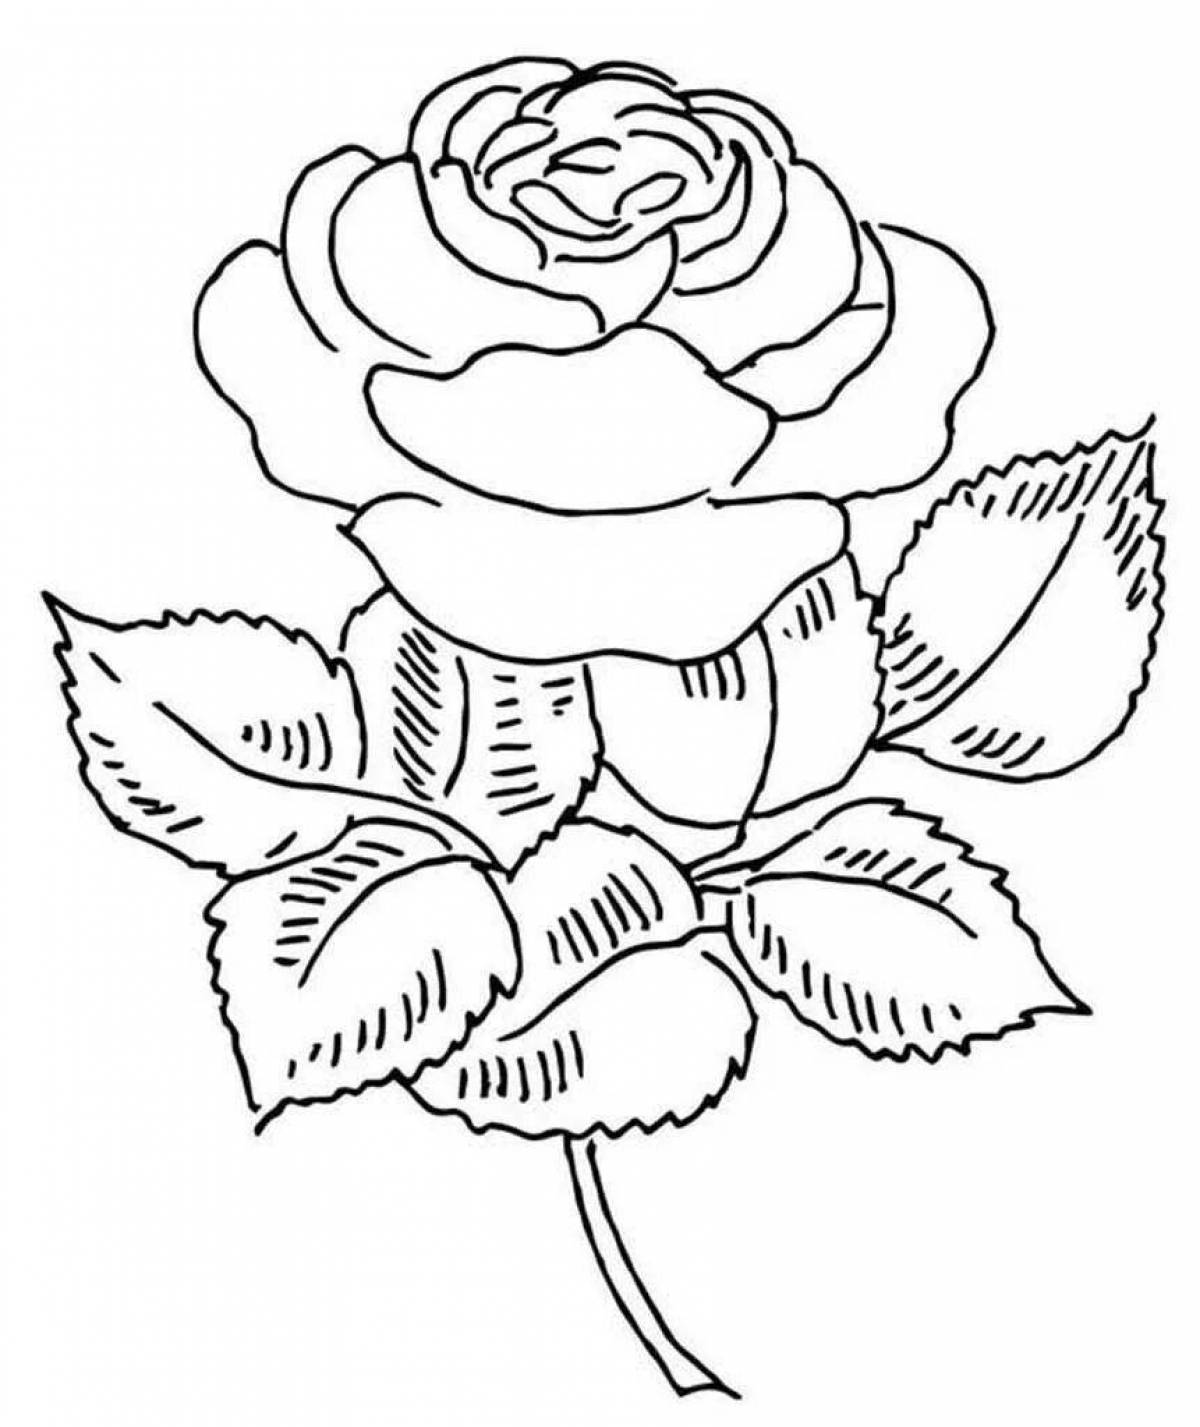 Coloring rose bloom for girls